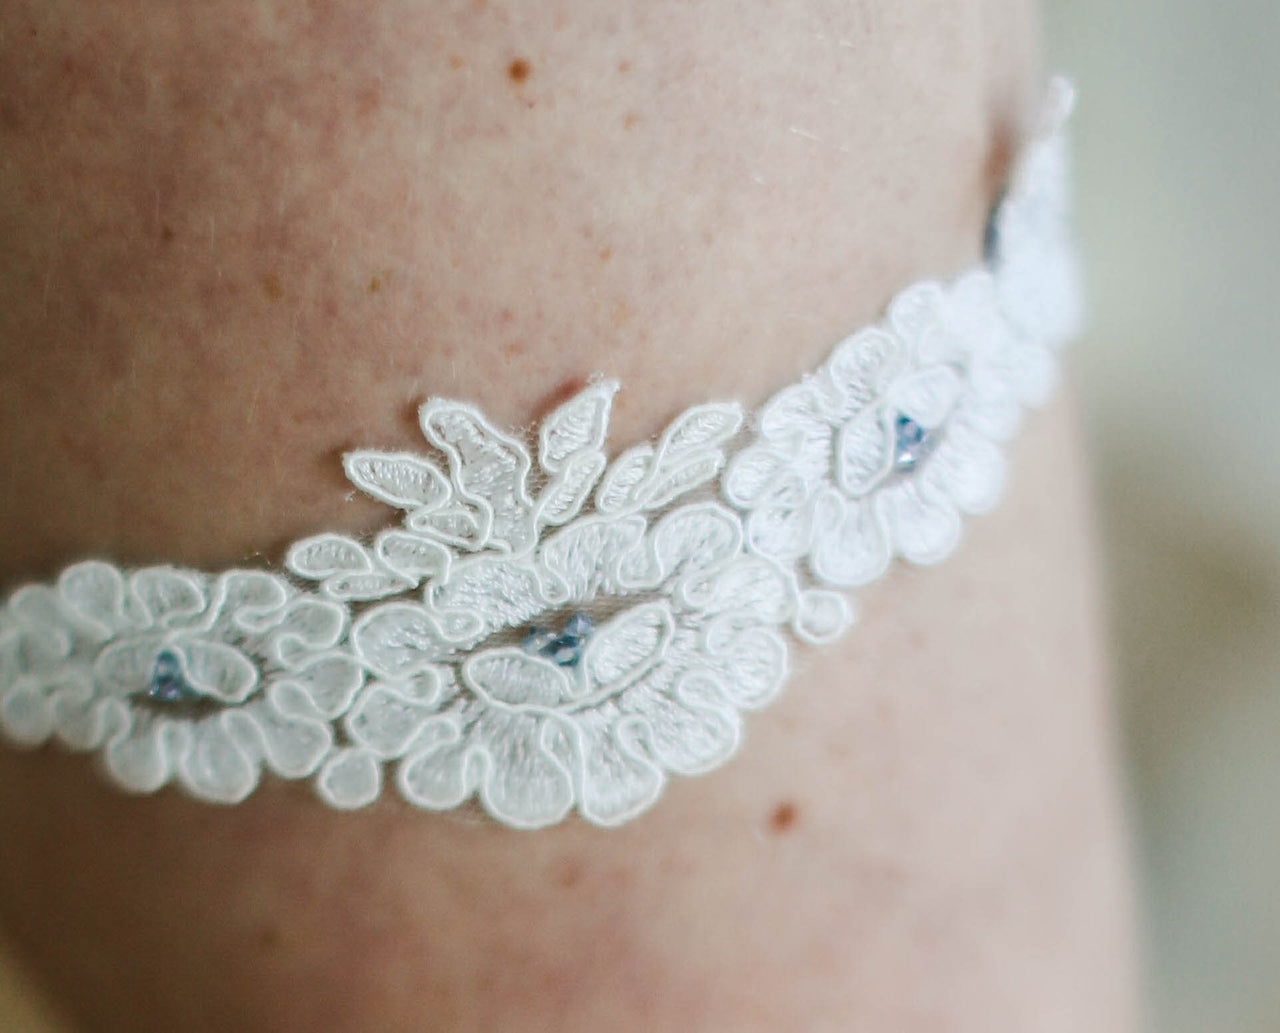 Handmade French lace and blue velvet wedding garter, made in the UK Truro Cornwall